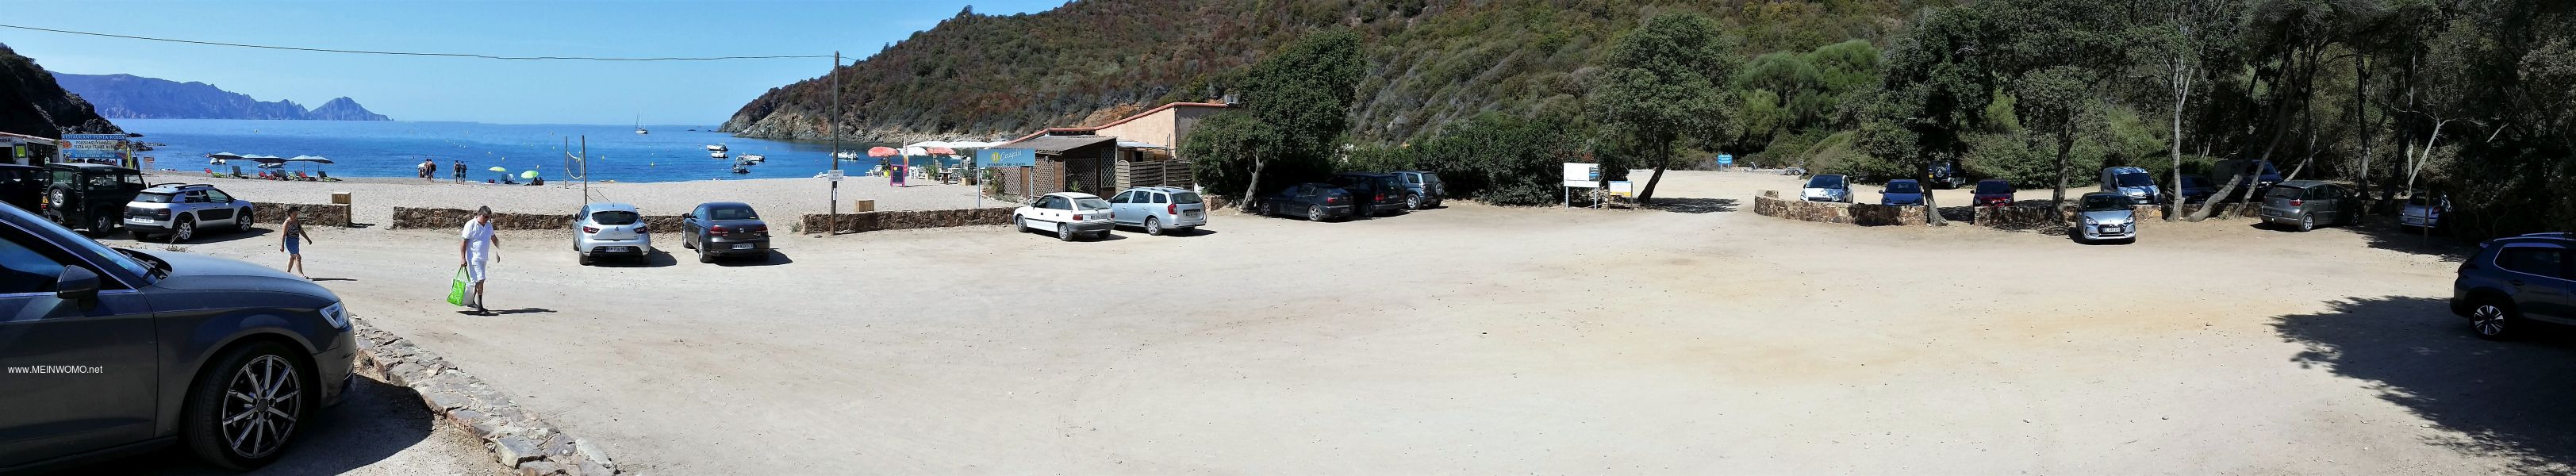  Parking right on the beach.